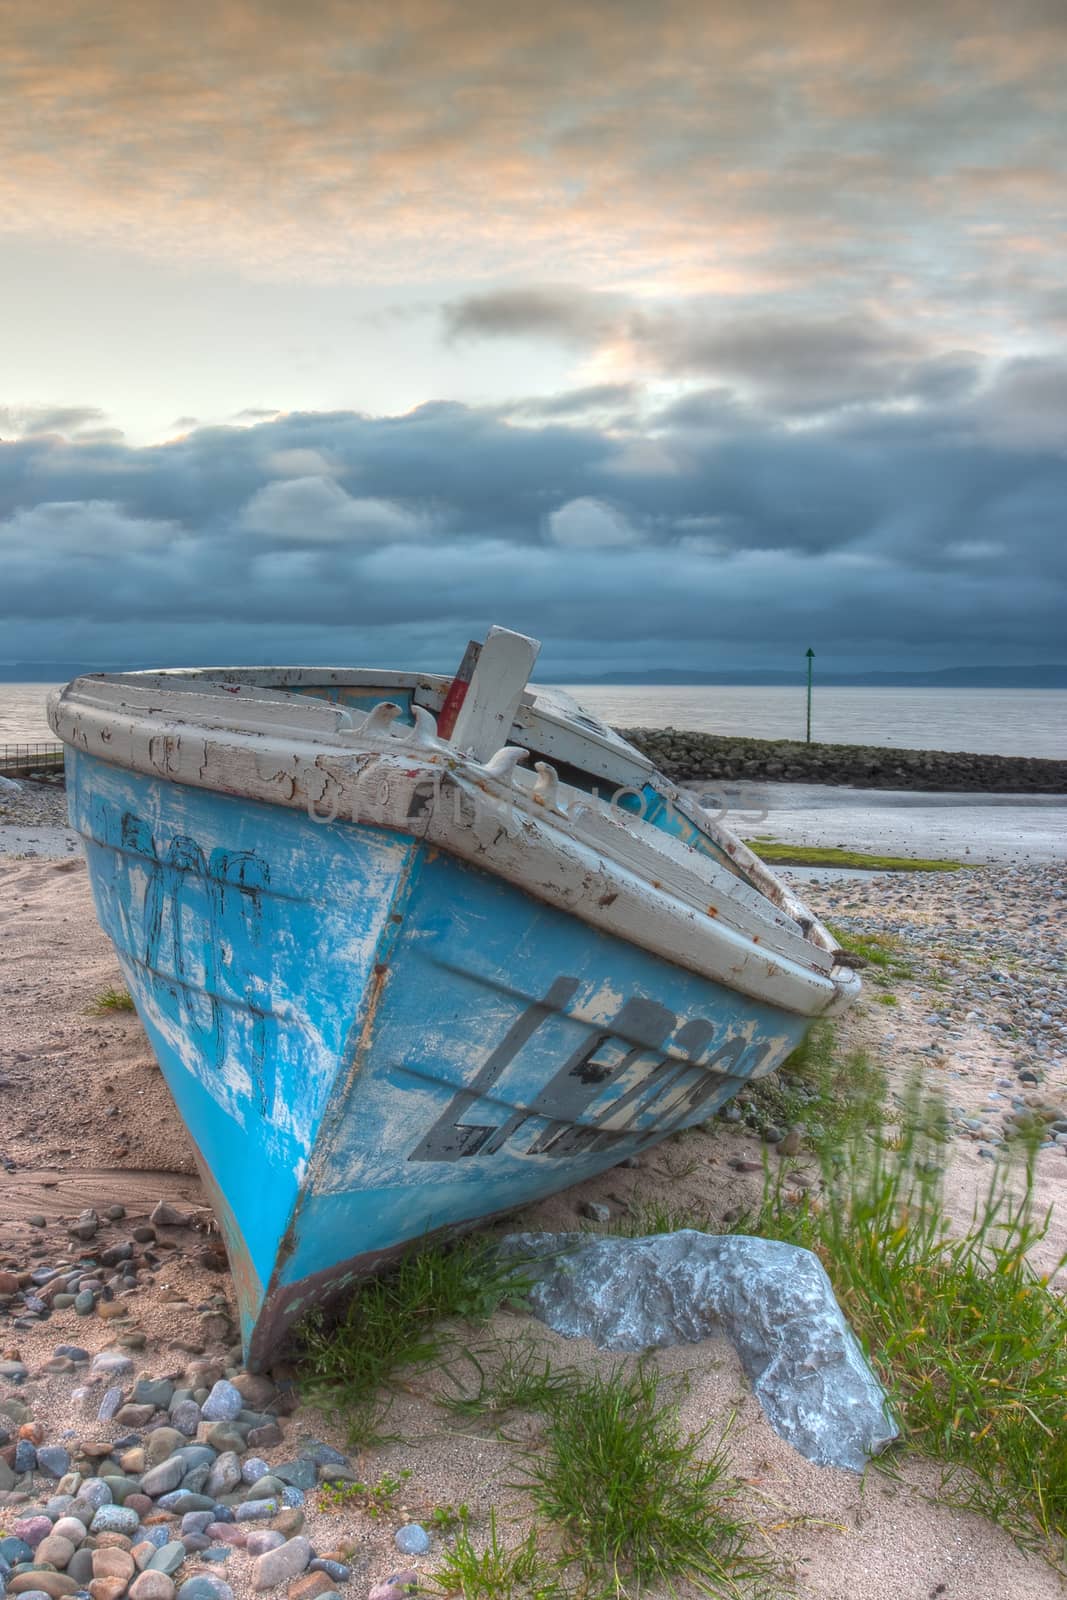 Damaged fishing boat on the empty beach in Morecambe, England, HDR Image